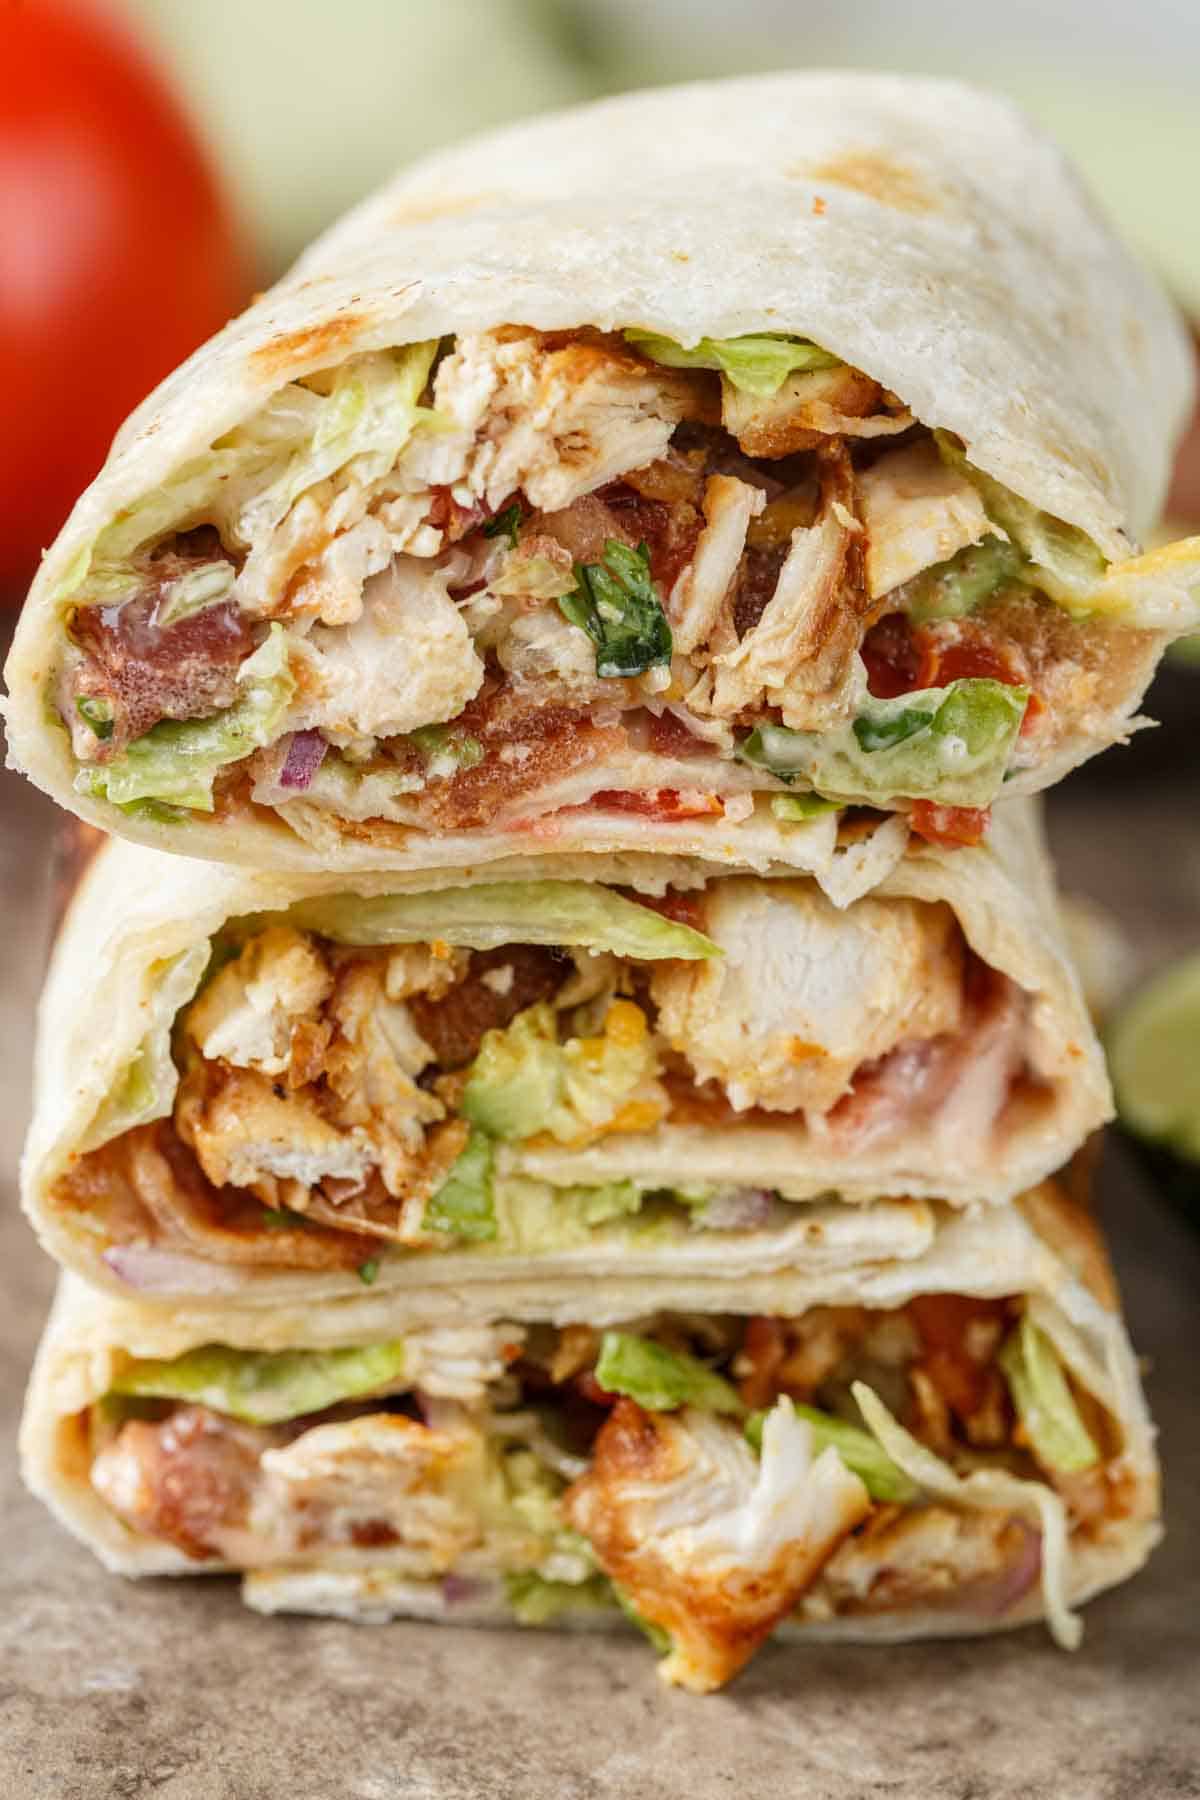 Upclose of cut open chicken wrap.